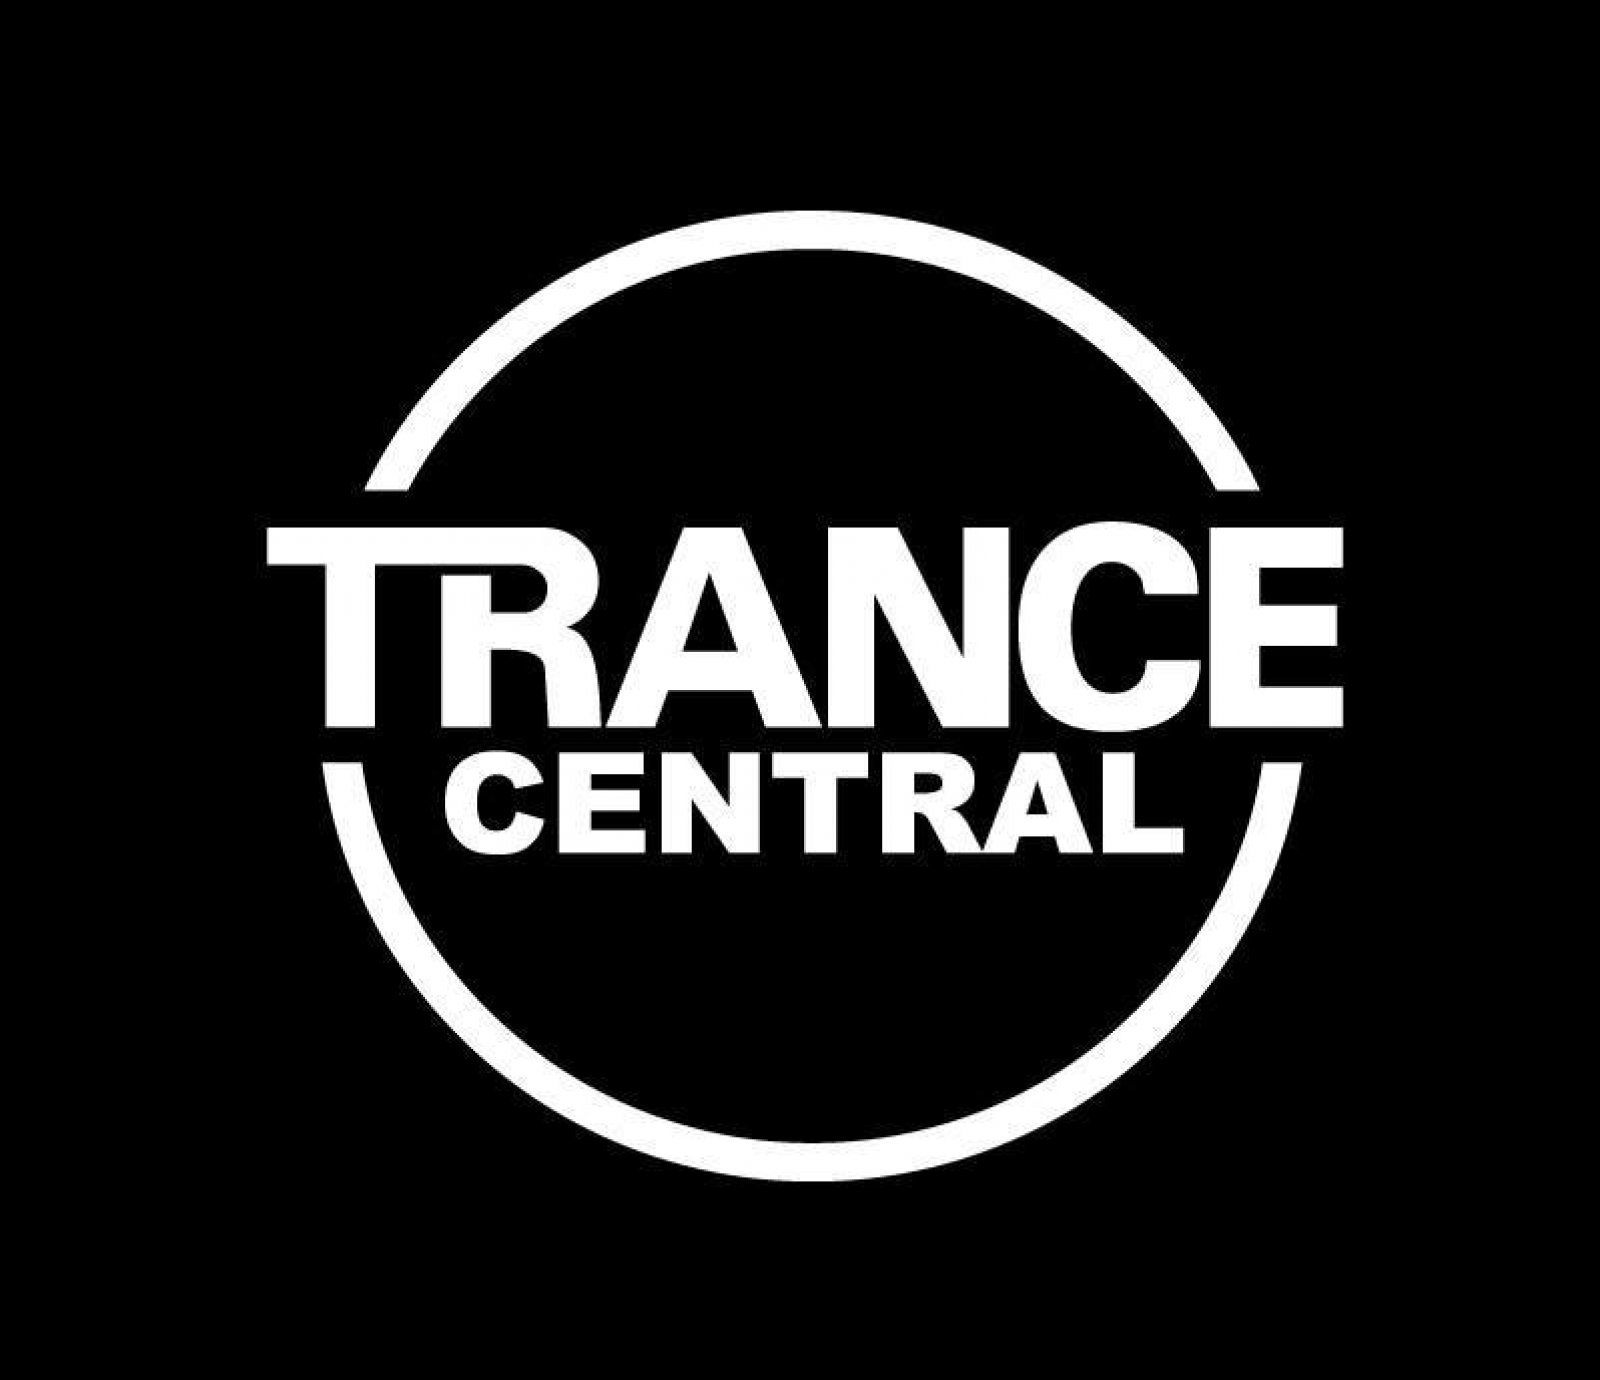 Trance Central